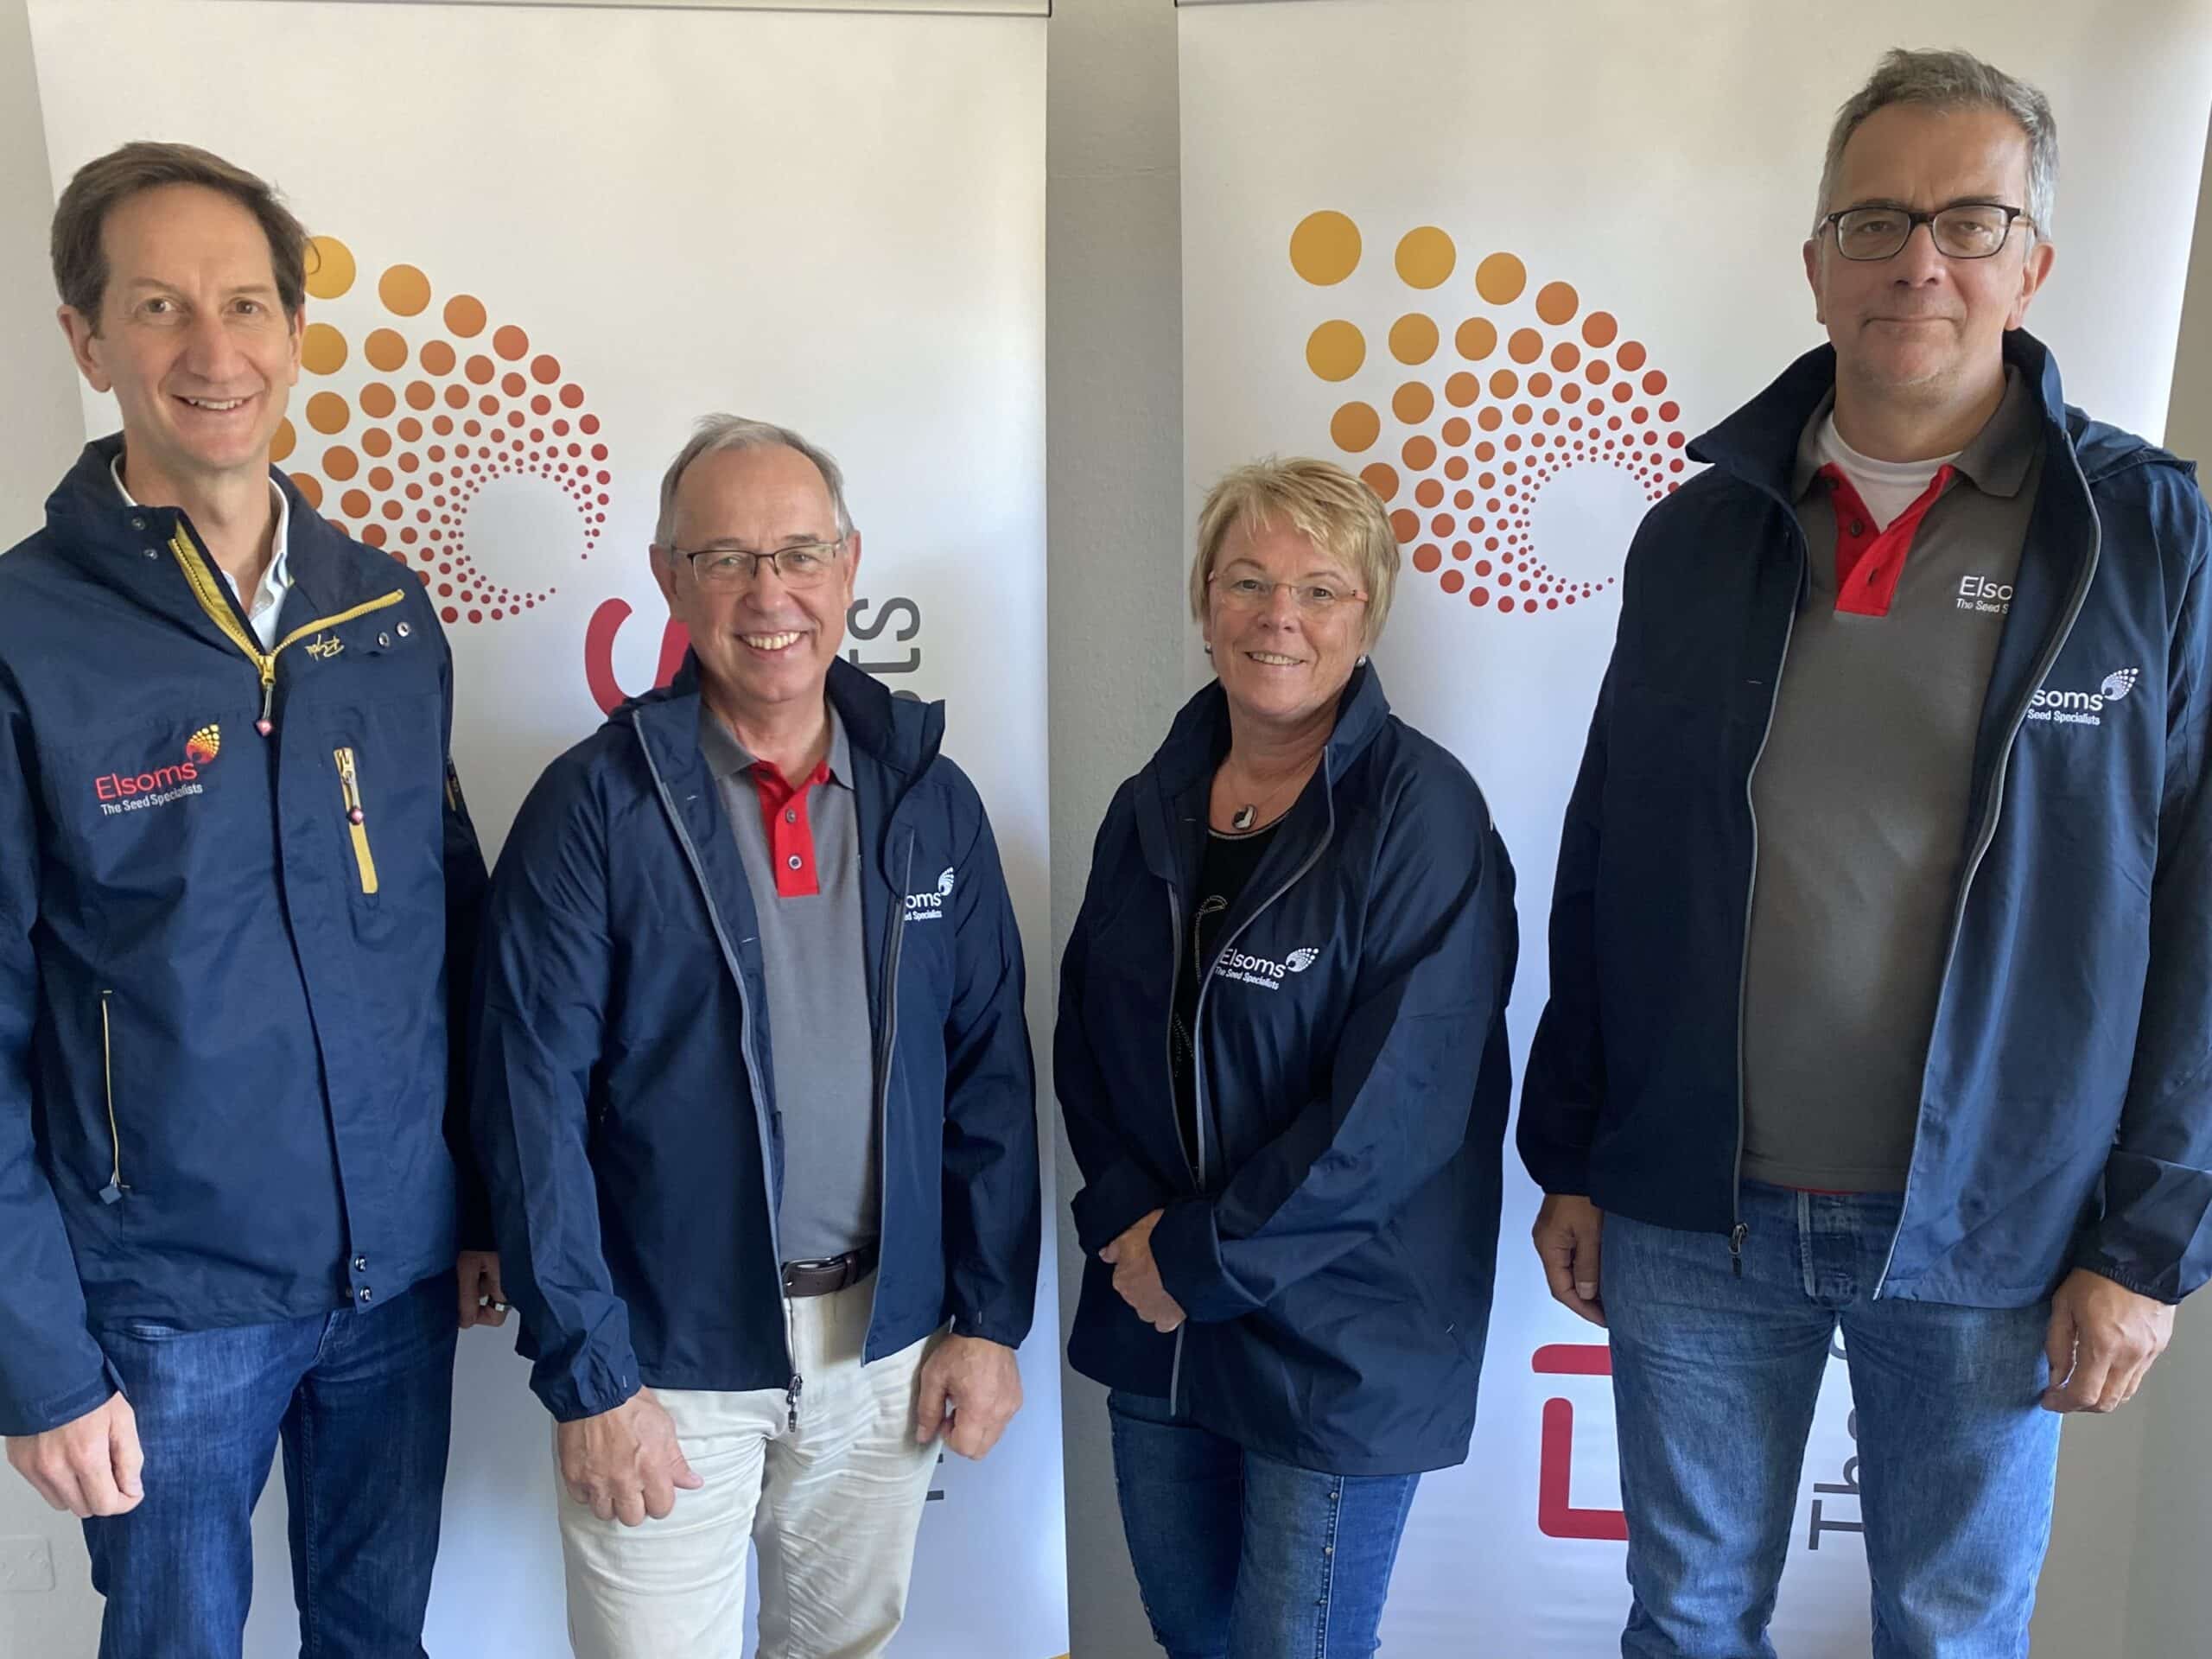 From left to right: Roger Keeling, Chairman of Elsoms with Elsoms’ international team, Lars Andersen, Marketing Director, Hildegard Jacobi, Production Manager and Martin Reisige, Managing Director